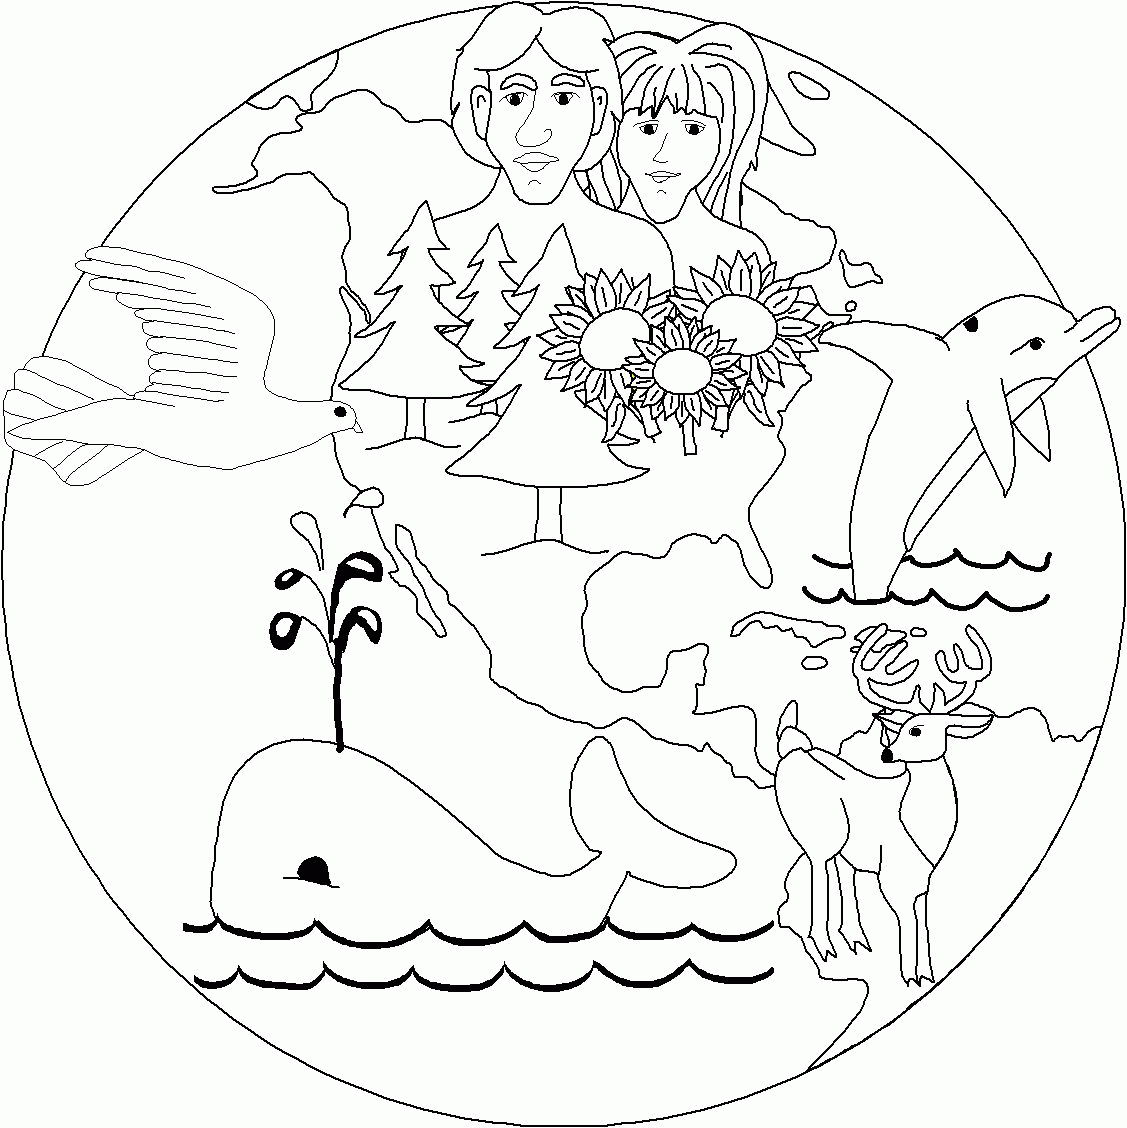 The Creation Coloring Pages - High Quality Coloring Pages